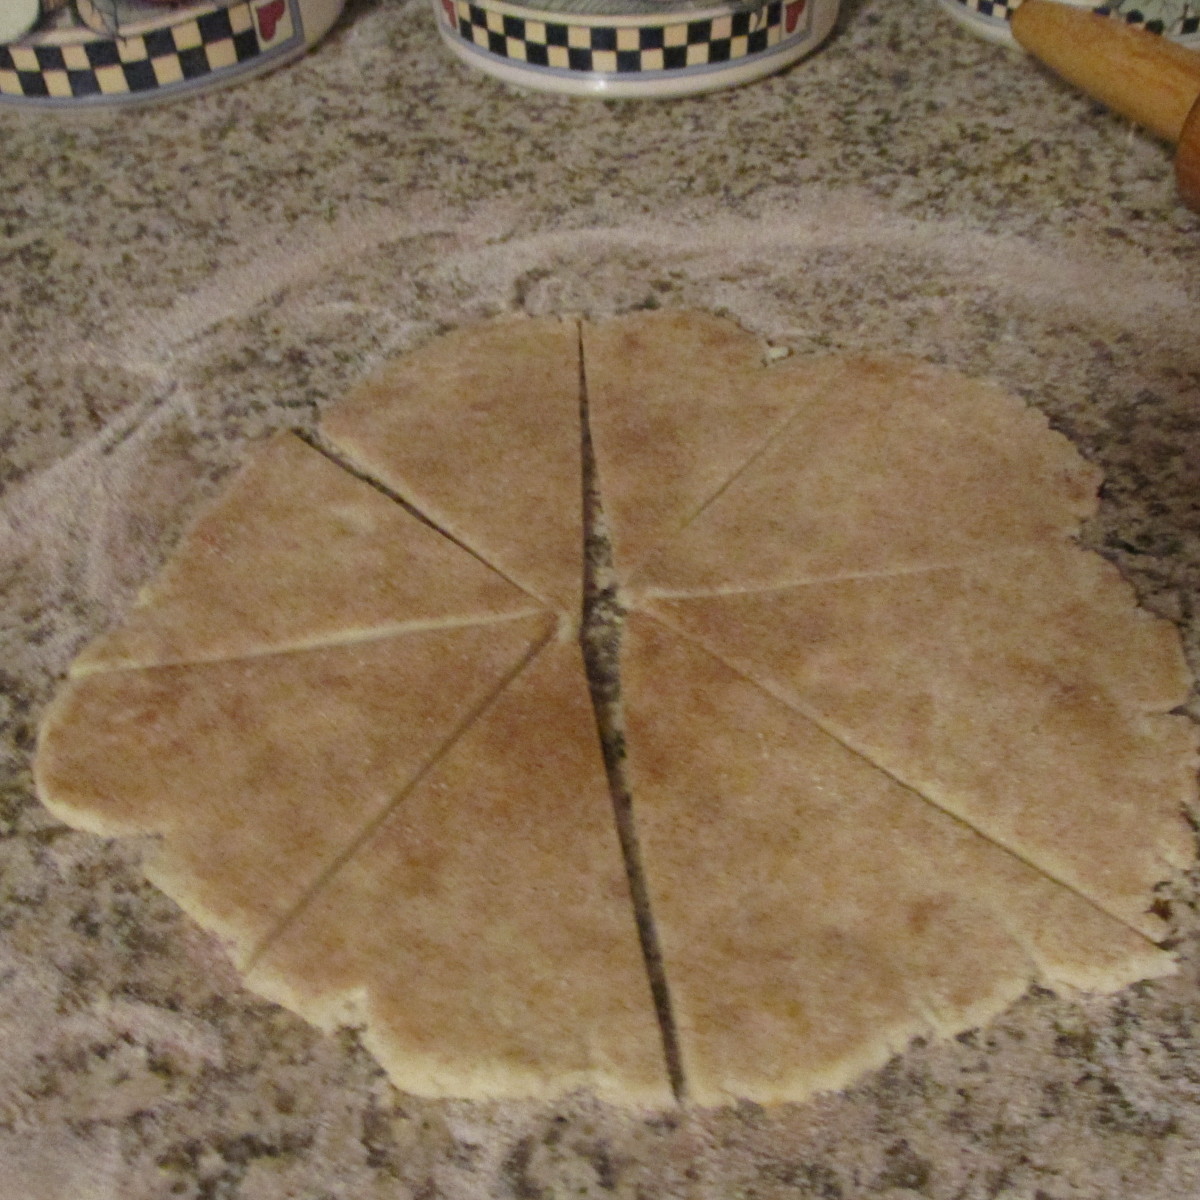 Cut each rolled-out circle into 8 wedges.